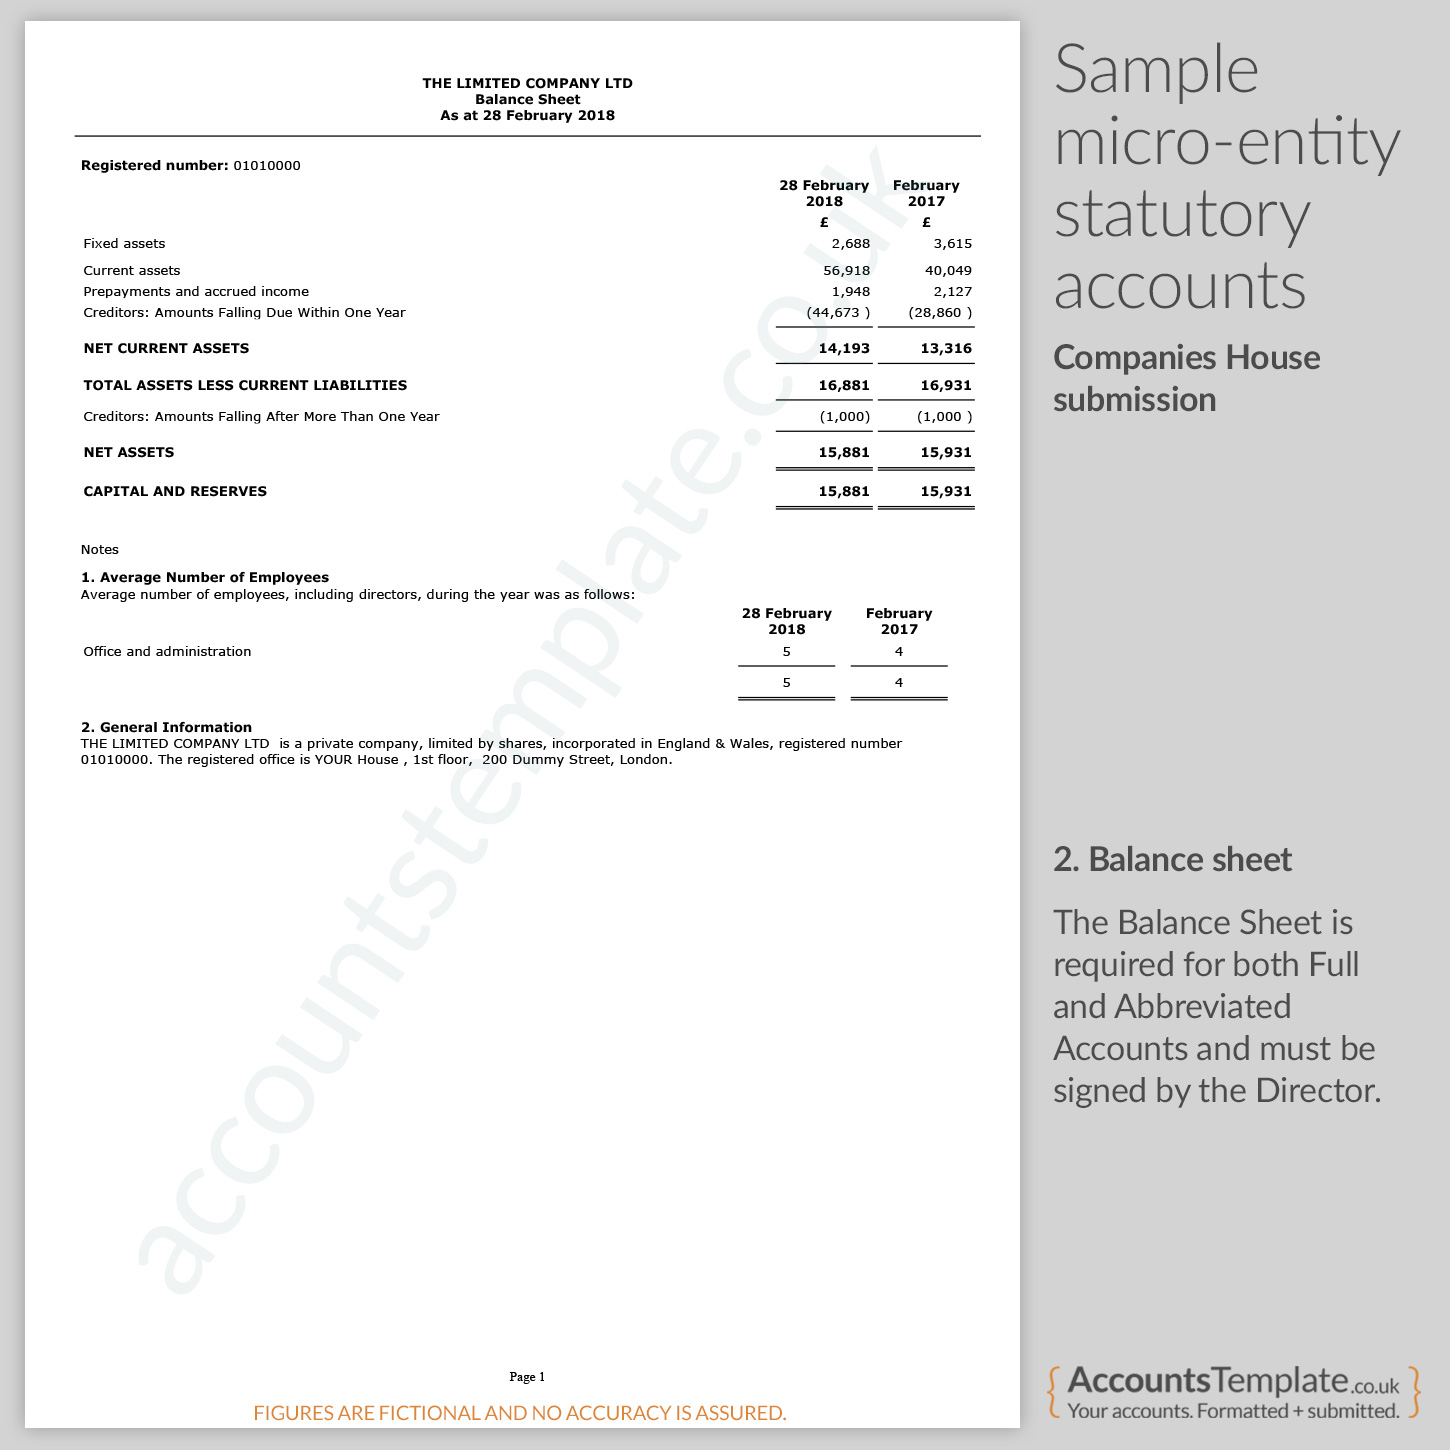 a guide to micro entity statutory accounts format template net worth balance sheet generator excel